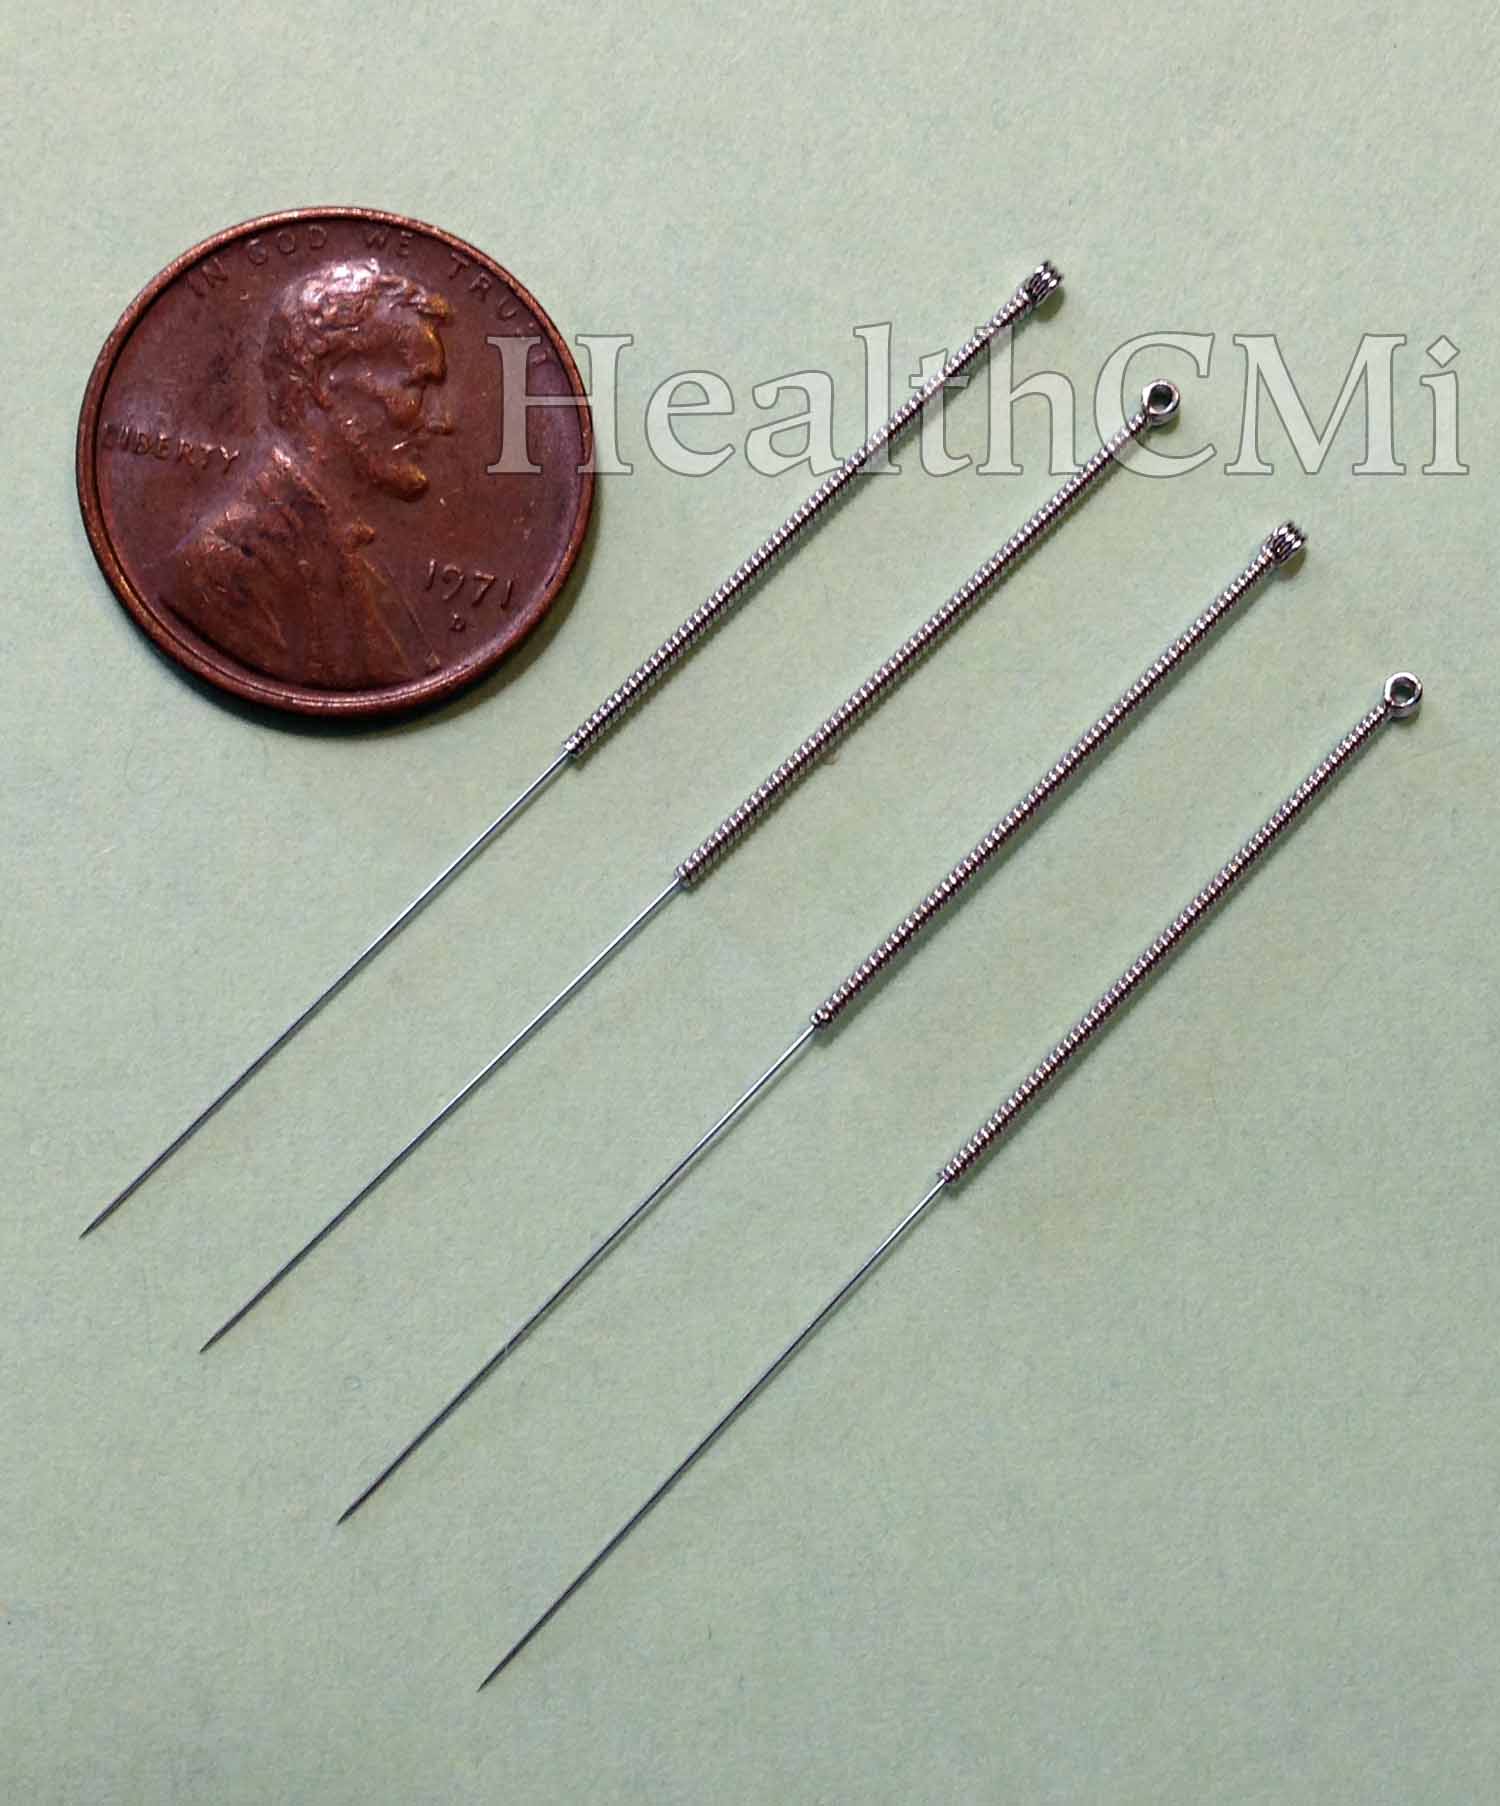 Acupuncture needles are pictured here. 